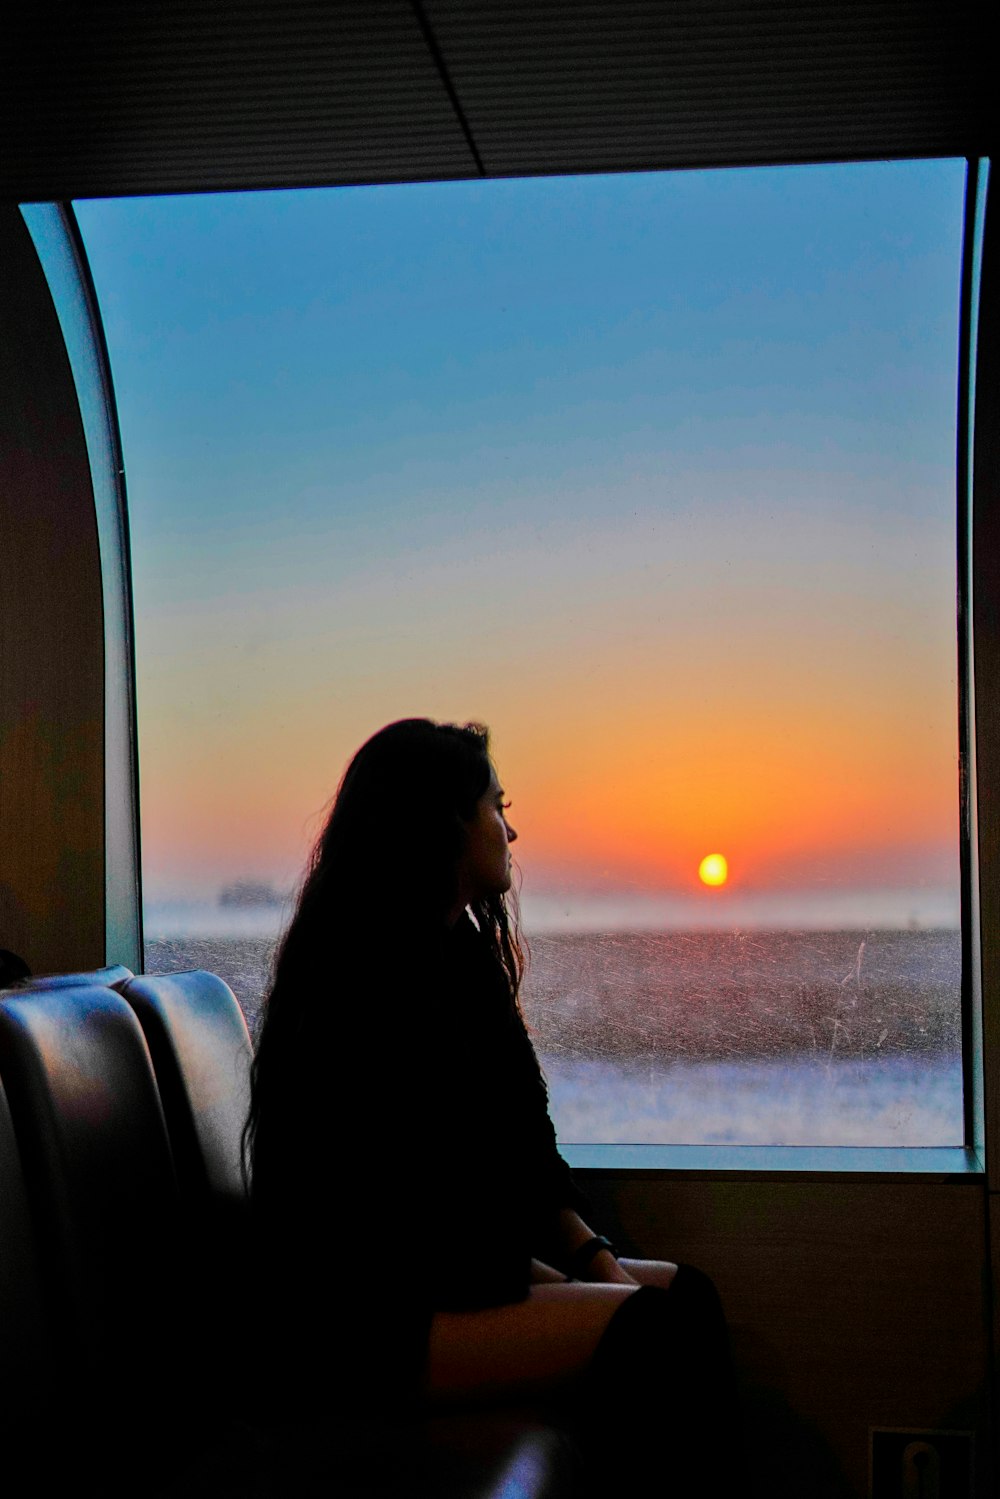 a person sitting on a couch looking out a window at the sunset